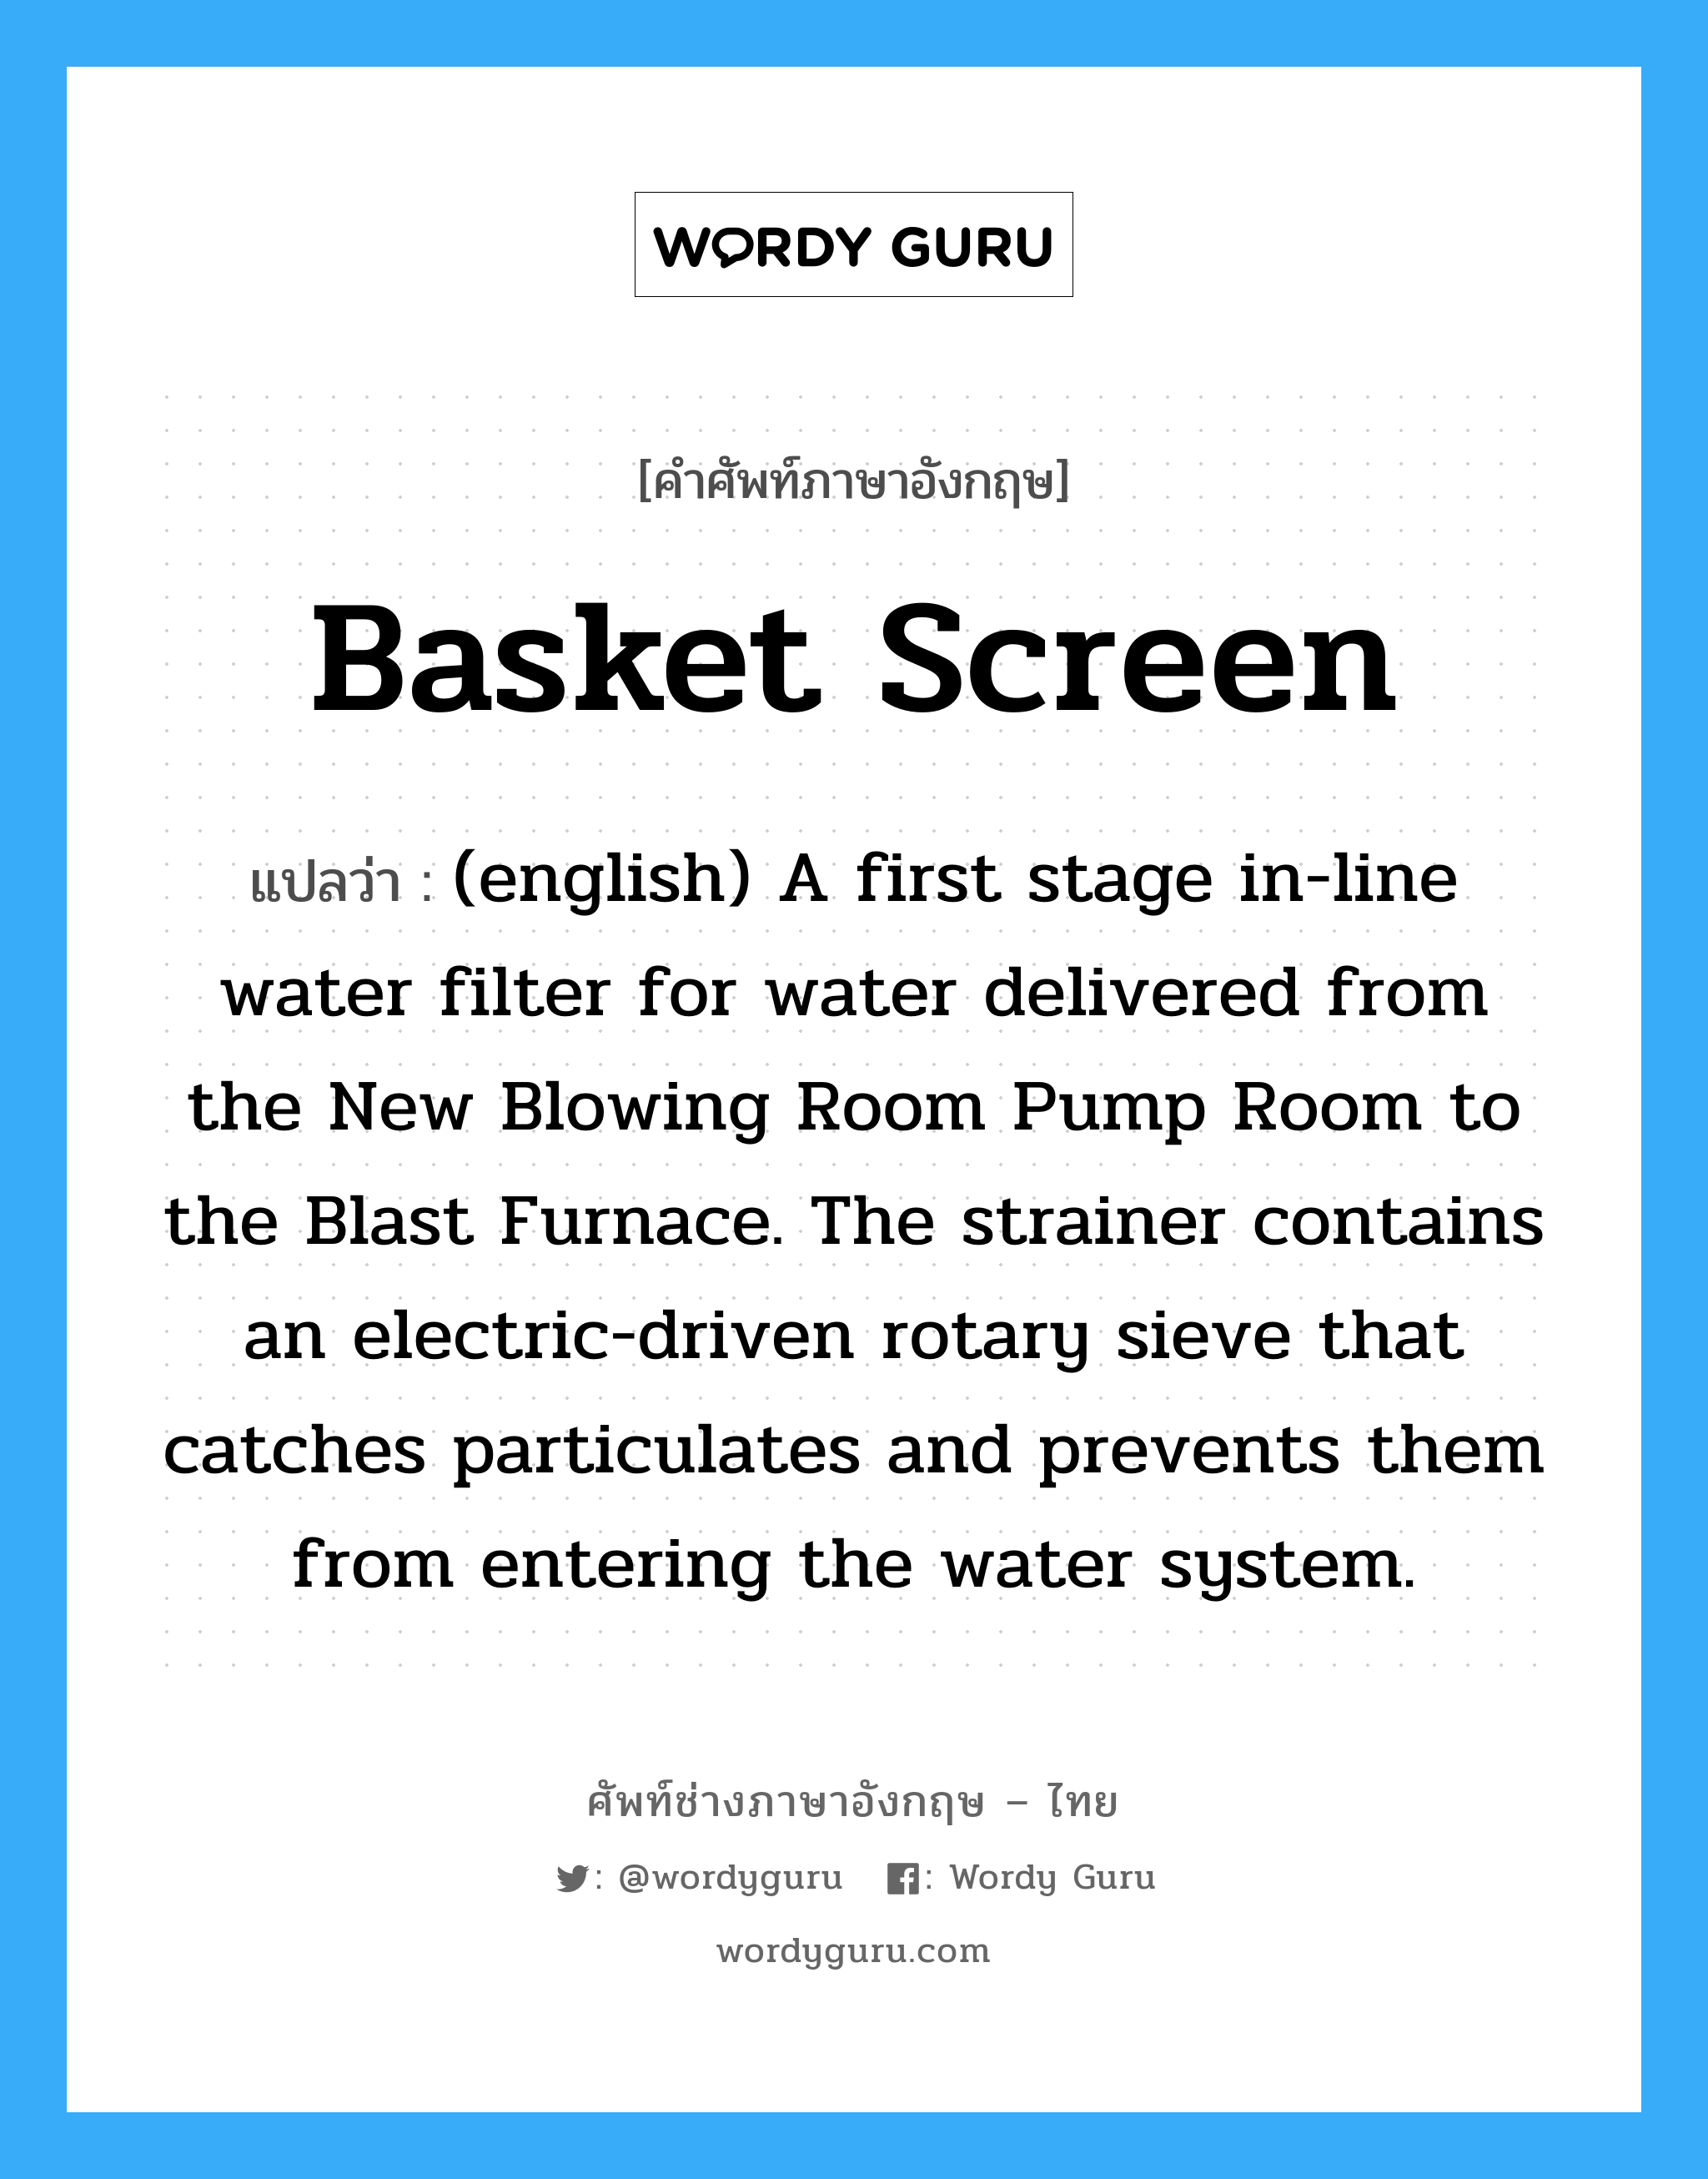 Basket Screen แปลว่า?, คำศัพท์ช่างภาษาอังกฤษ - ไทย Basket Screen คำศัพท์ภาษาอังกฤษ Basket Screen แปลว่า (english) A first stage in-line water filter for water delivered from the New Blowing Room Pump Room to the Blast Furnace. The strainer contains an electric-driven rotary sieve that catches particulates and prevents them from entering the water system.